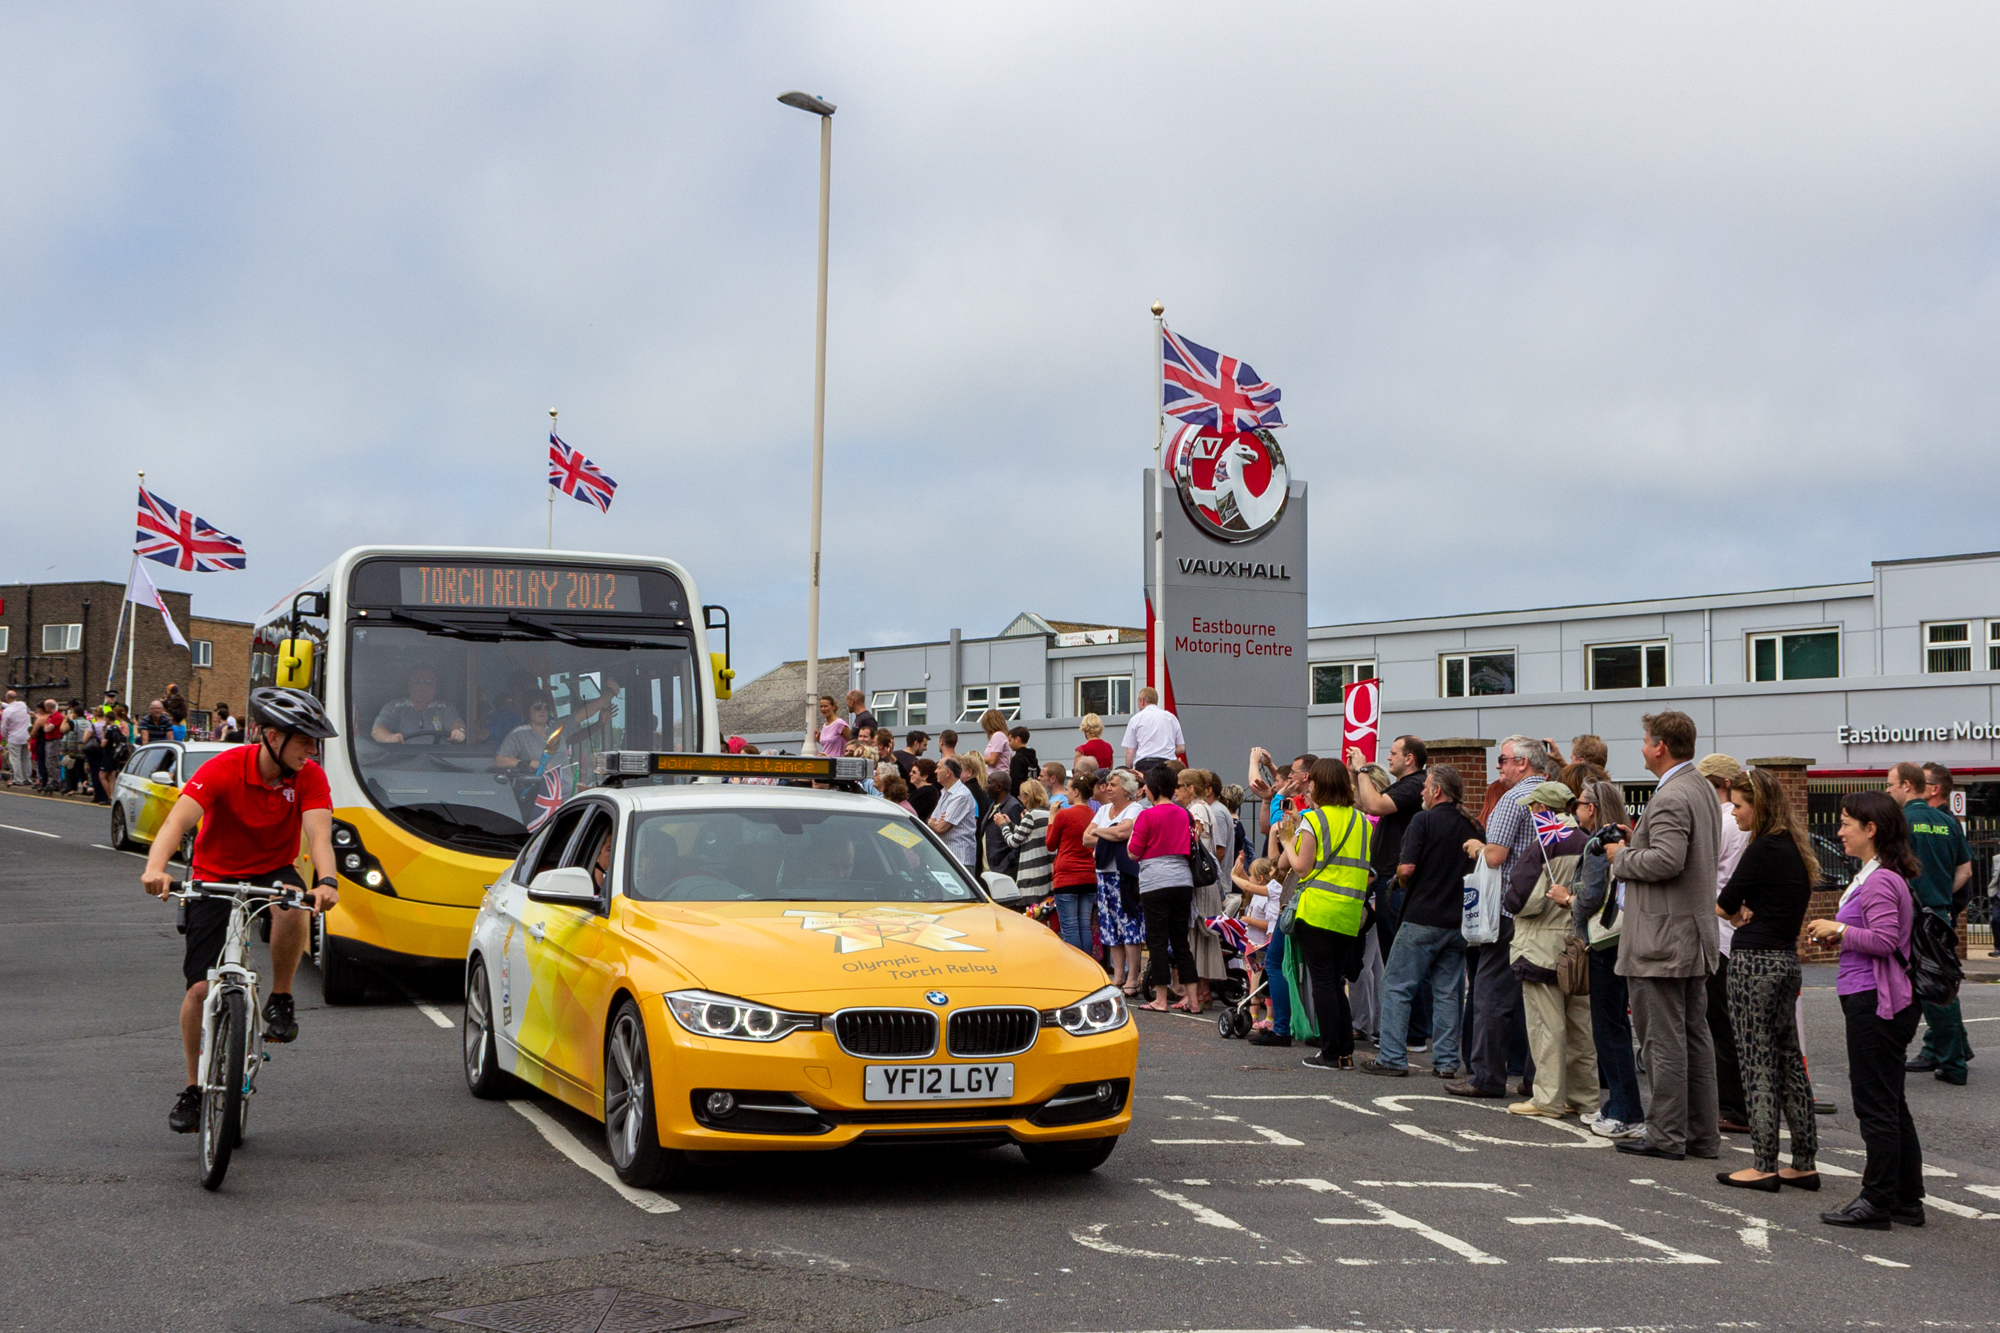 Olympic Torch Relay 2012 Vehicles